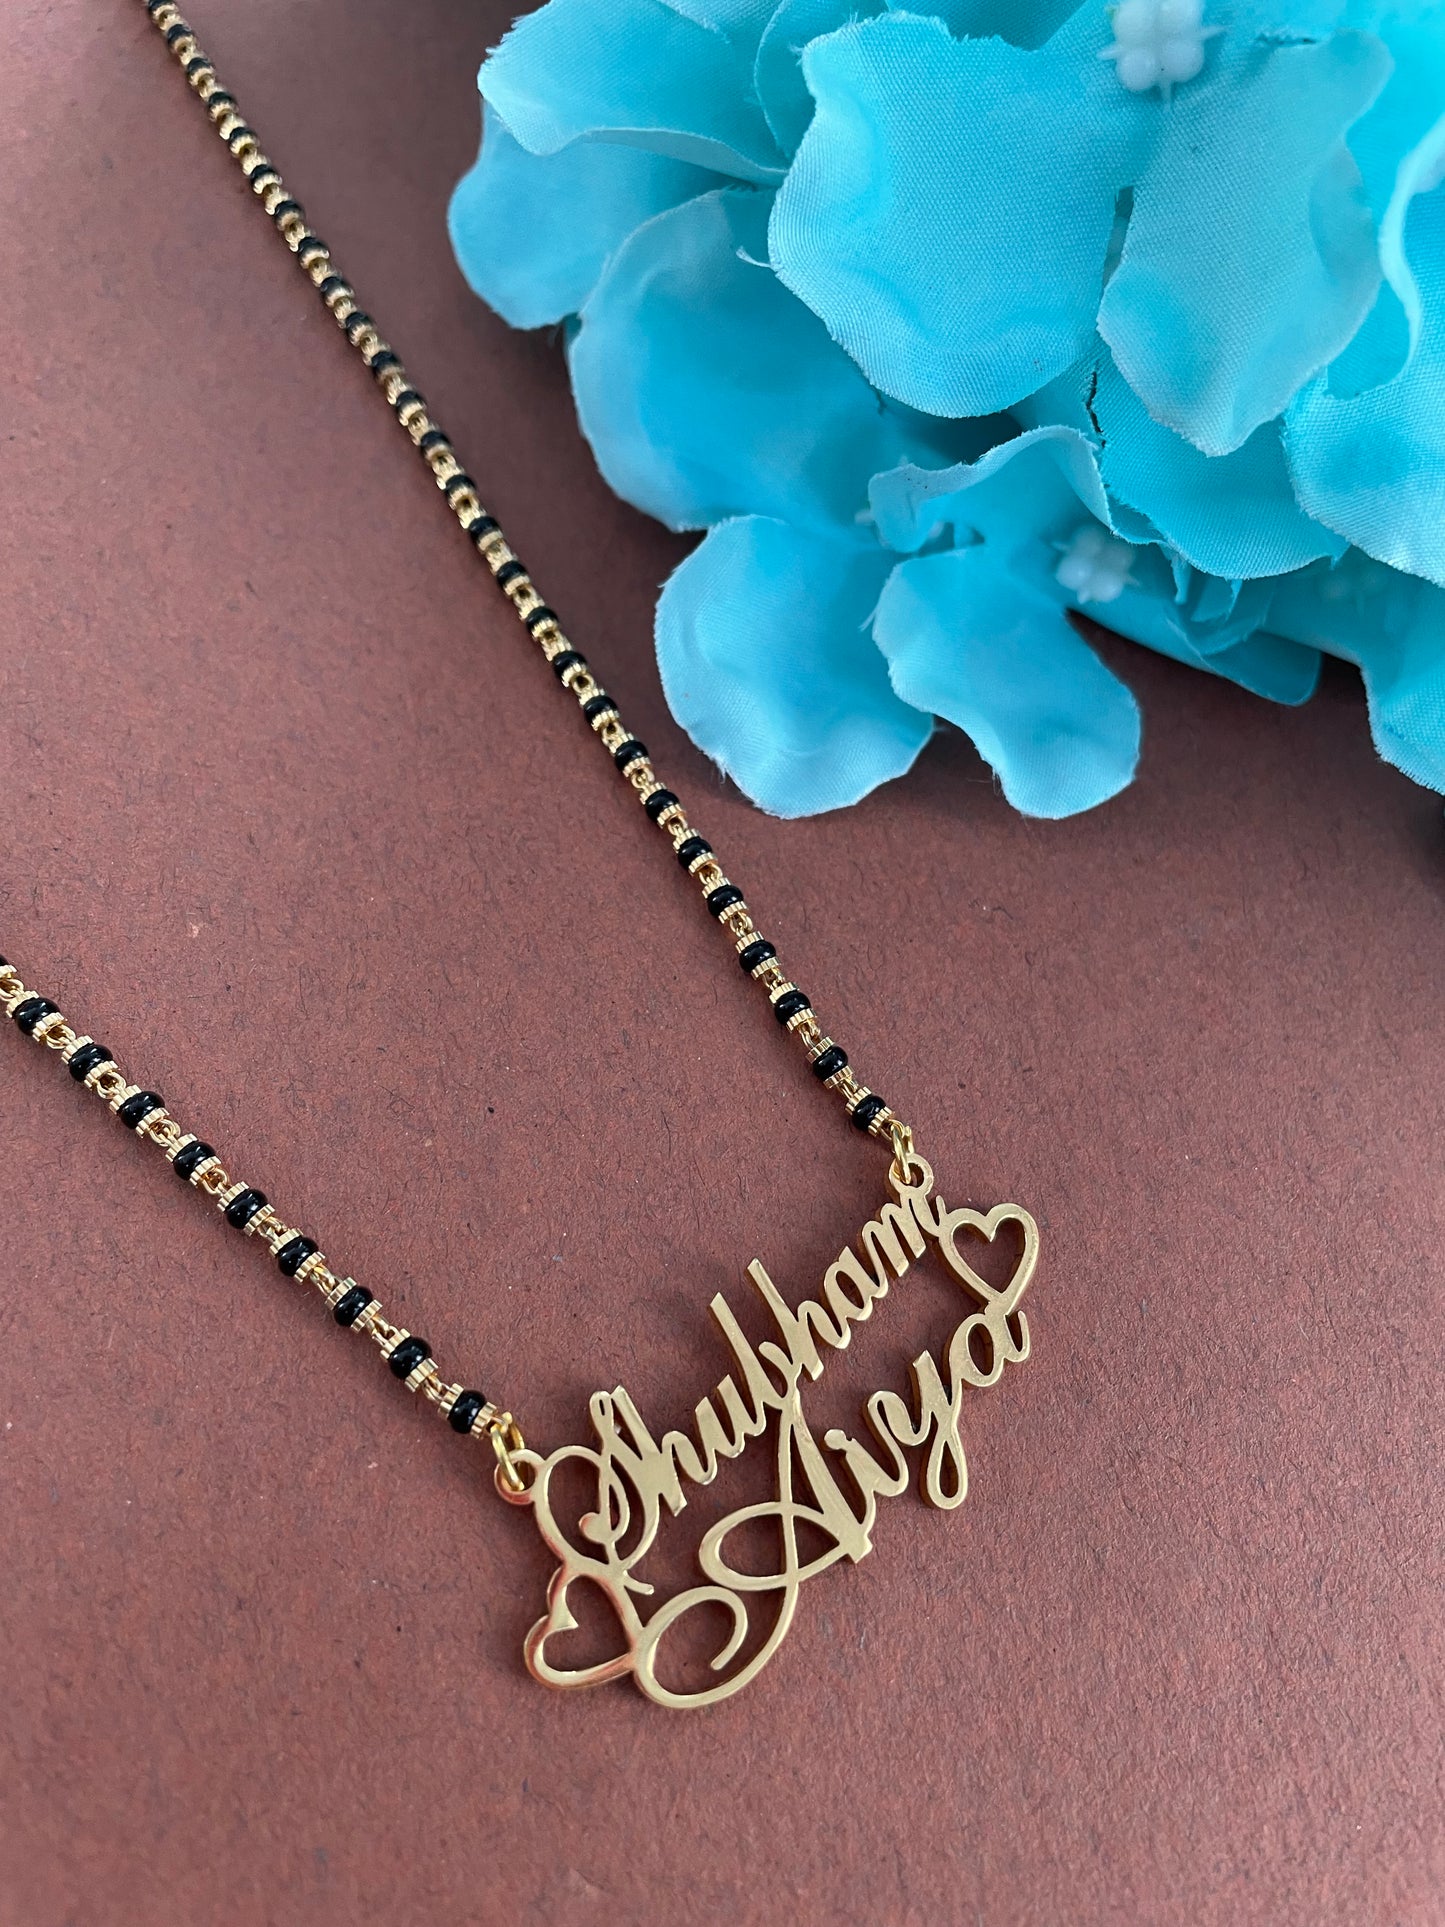 Cursive Name Long Mangalsutra Long Necklace With 2 Personalized Names Mini Hearts & Black Beaded Chain